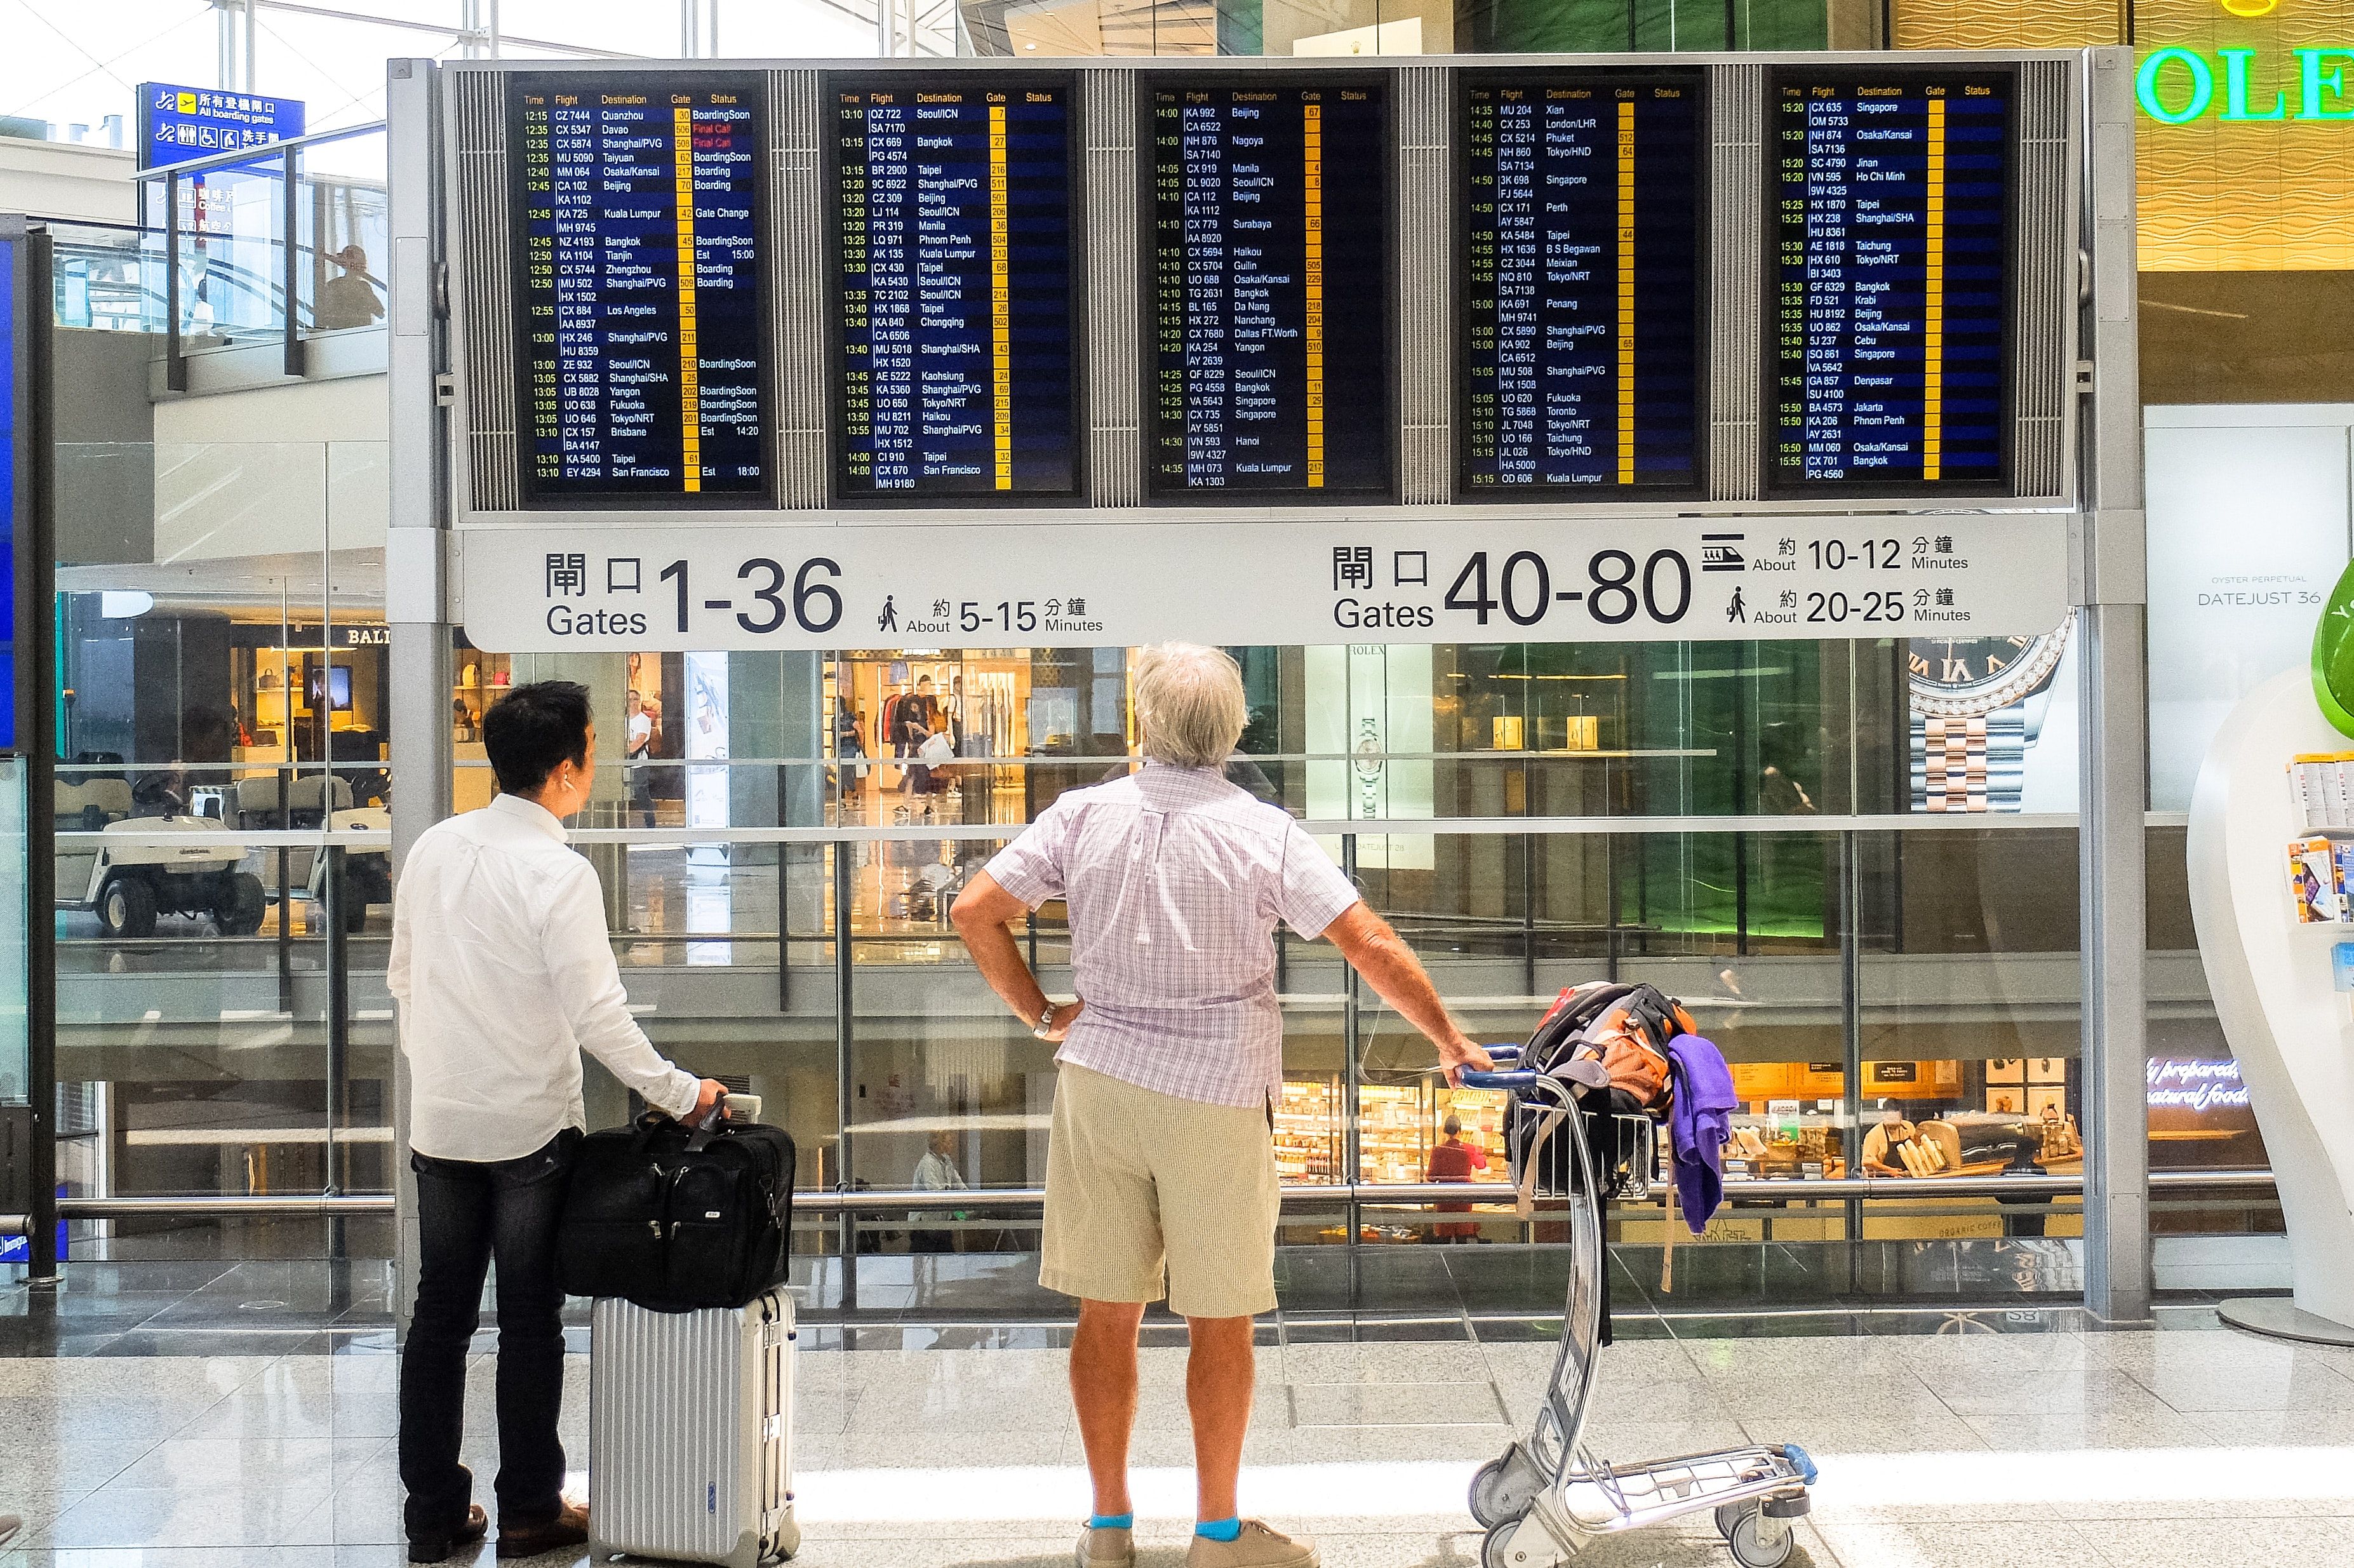 Two passengers look at screens in an airport terminal displaying upcoming arrivals and departures.